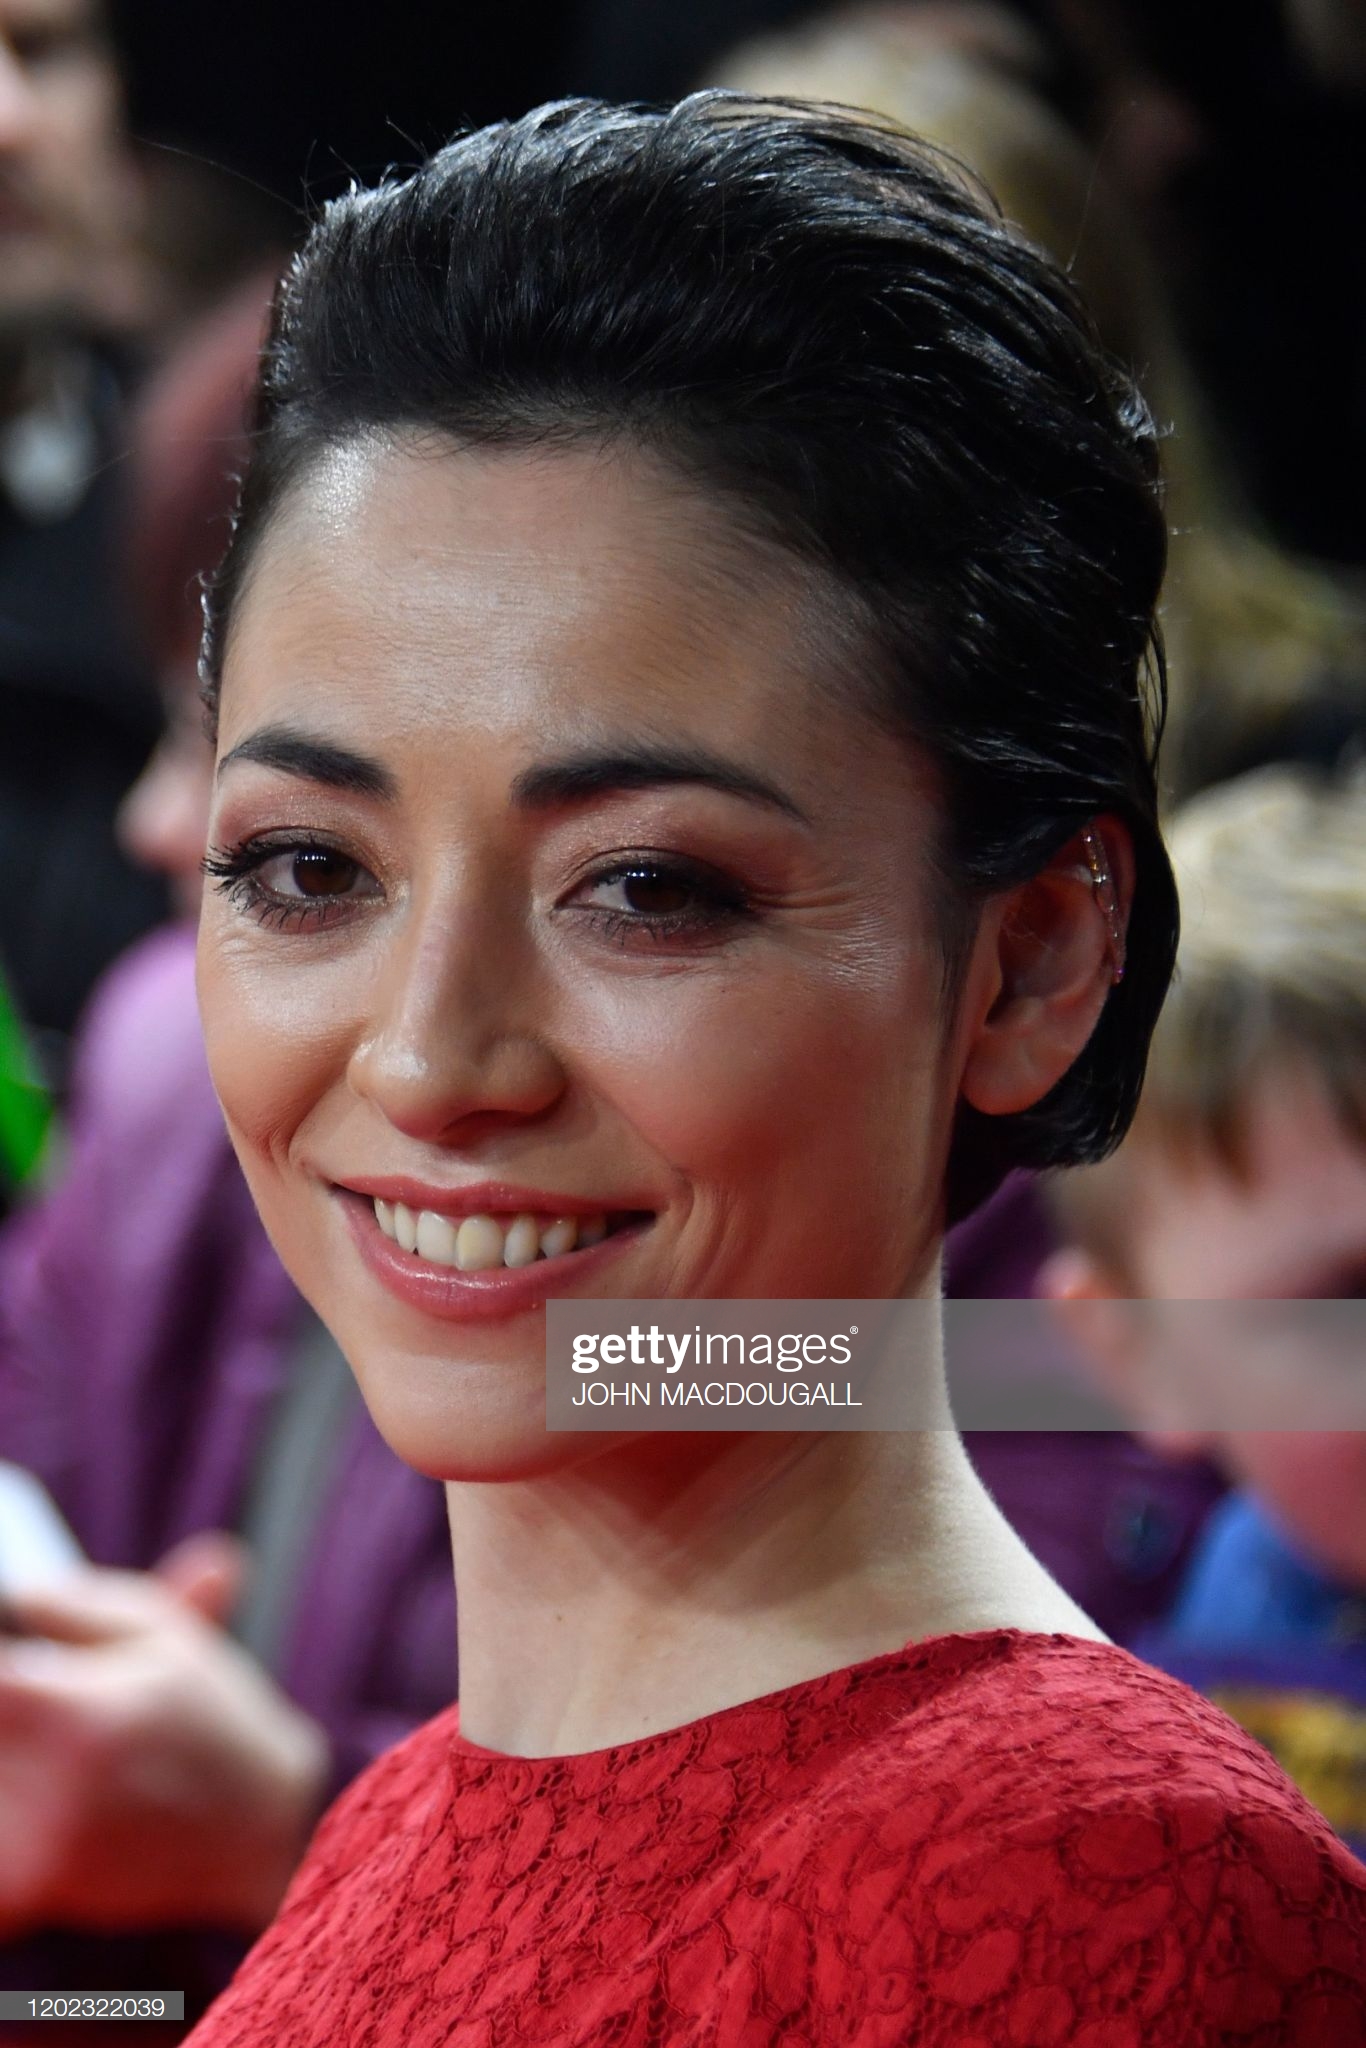 Japanese actress Minami poses on the red carpet for the premiere of the film "Minamata" screened in the Berlinale Special Gala on February 21, 2020 at the 70th Berlinale film festival in Berlin. - The 11-day Berlinale, one of Europe's most prestigious film extravaganzas alongside Cannes and Venice, celebrates its 70th anniversary in 2020 and will be running from February 20 to March 1, 2020. (Photo by John MACDOUGALL / AFP) / ALTERNATIVE CROP (Photo by JOHN MACDOUGALL/AFP via Getty Images)